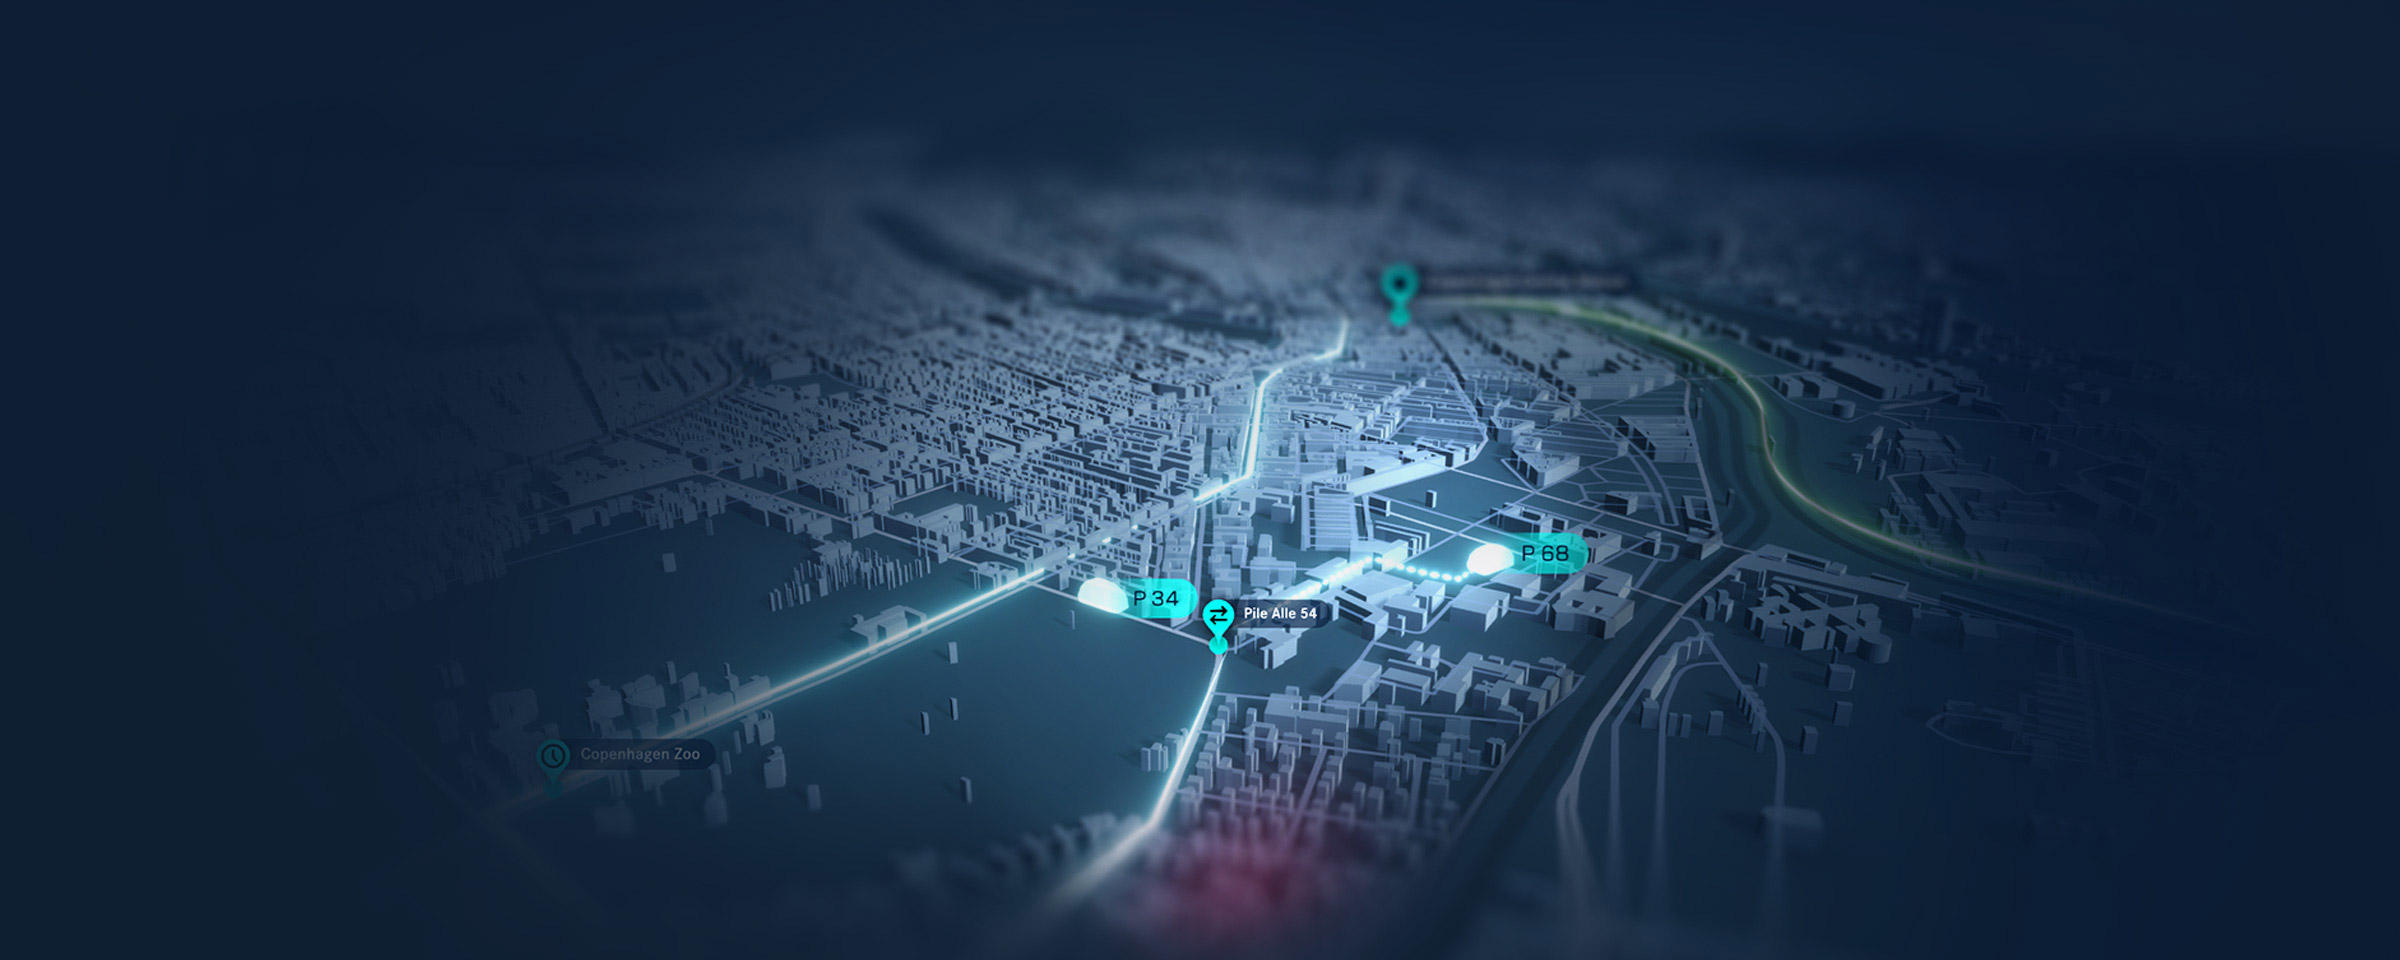 Blue 3D city map with routes and destinations